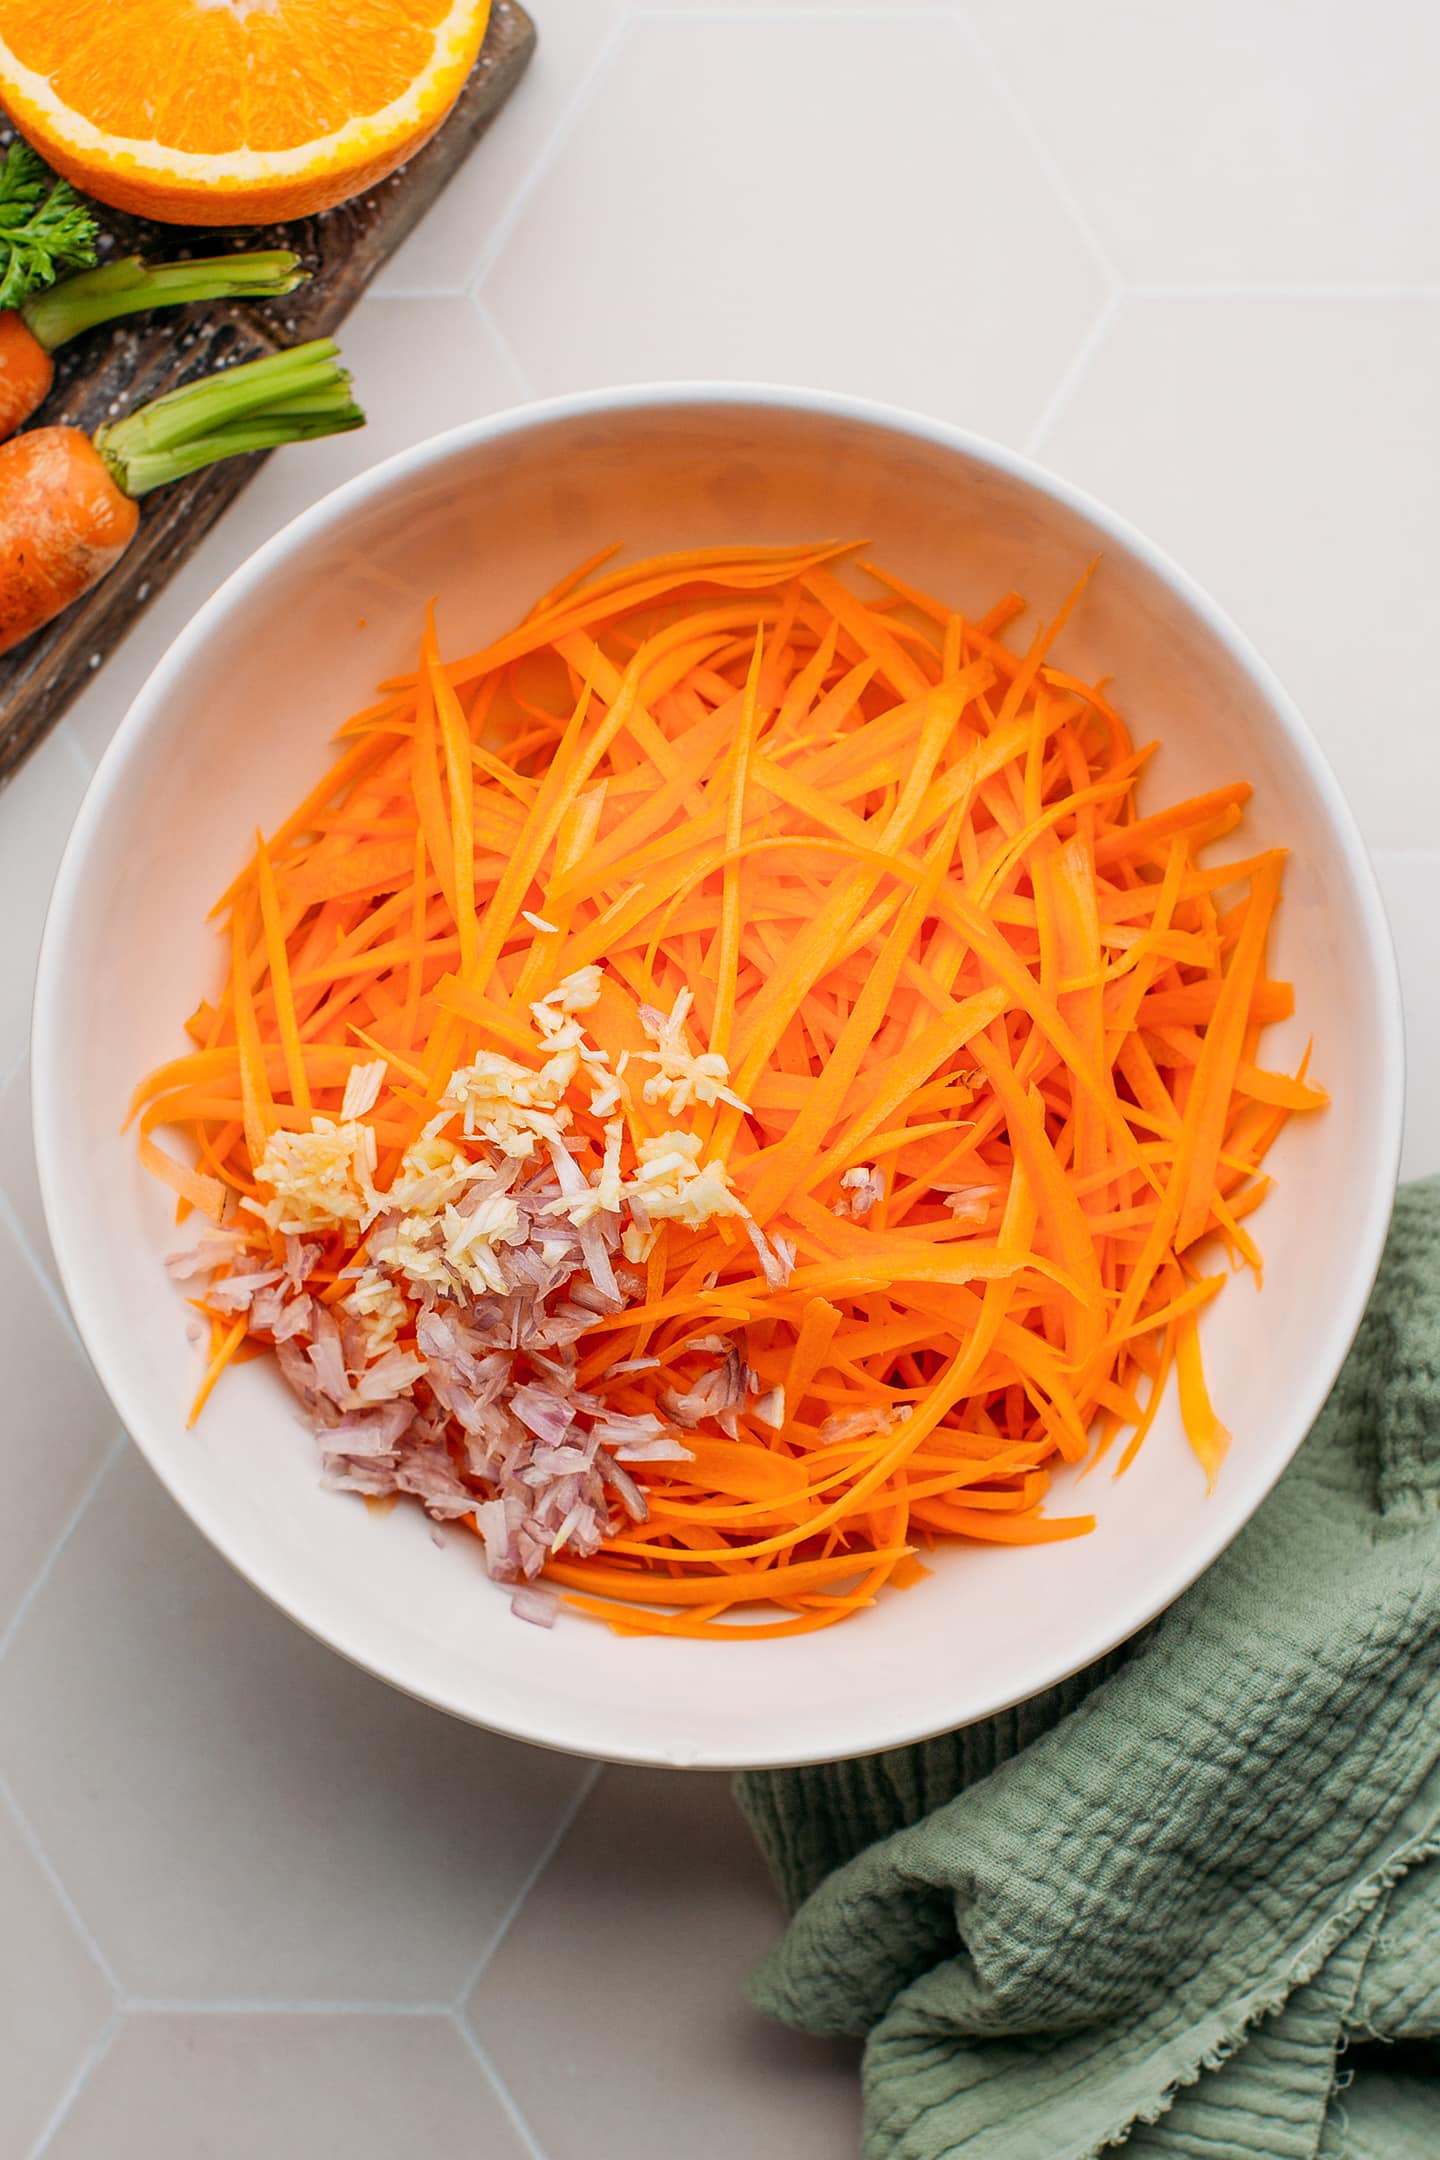 Grated carrots, garlic, and shallots in a mixing bowl.